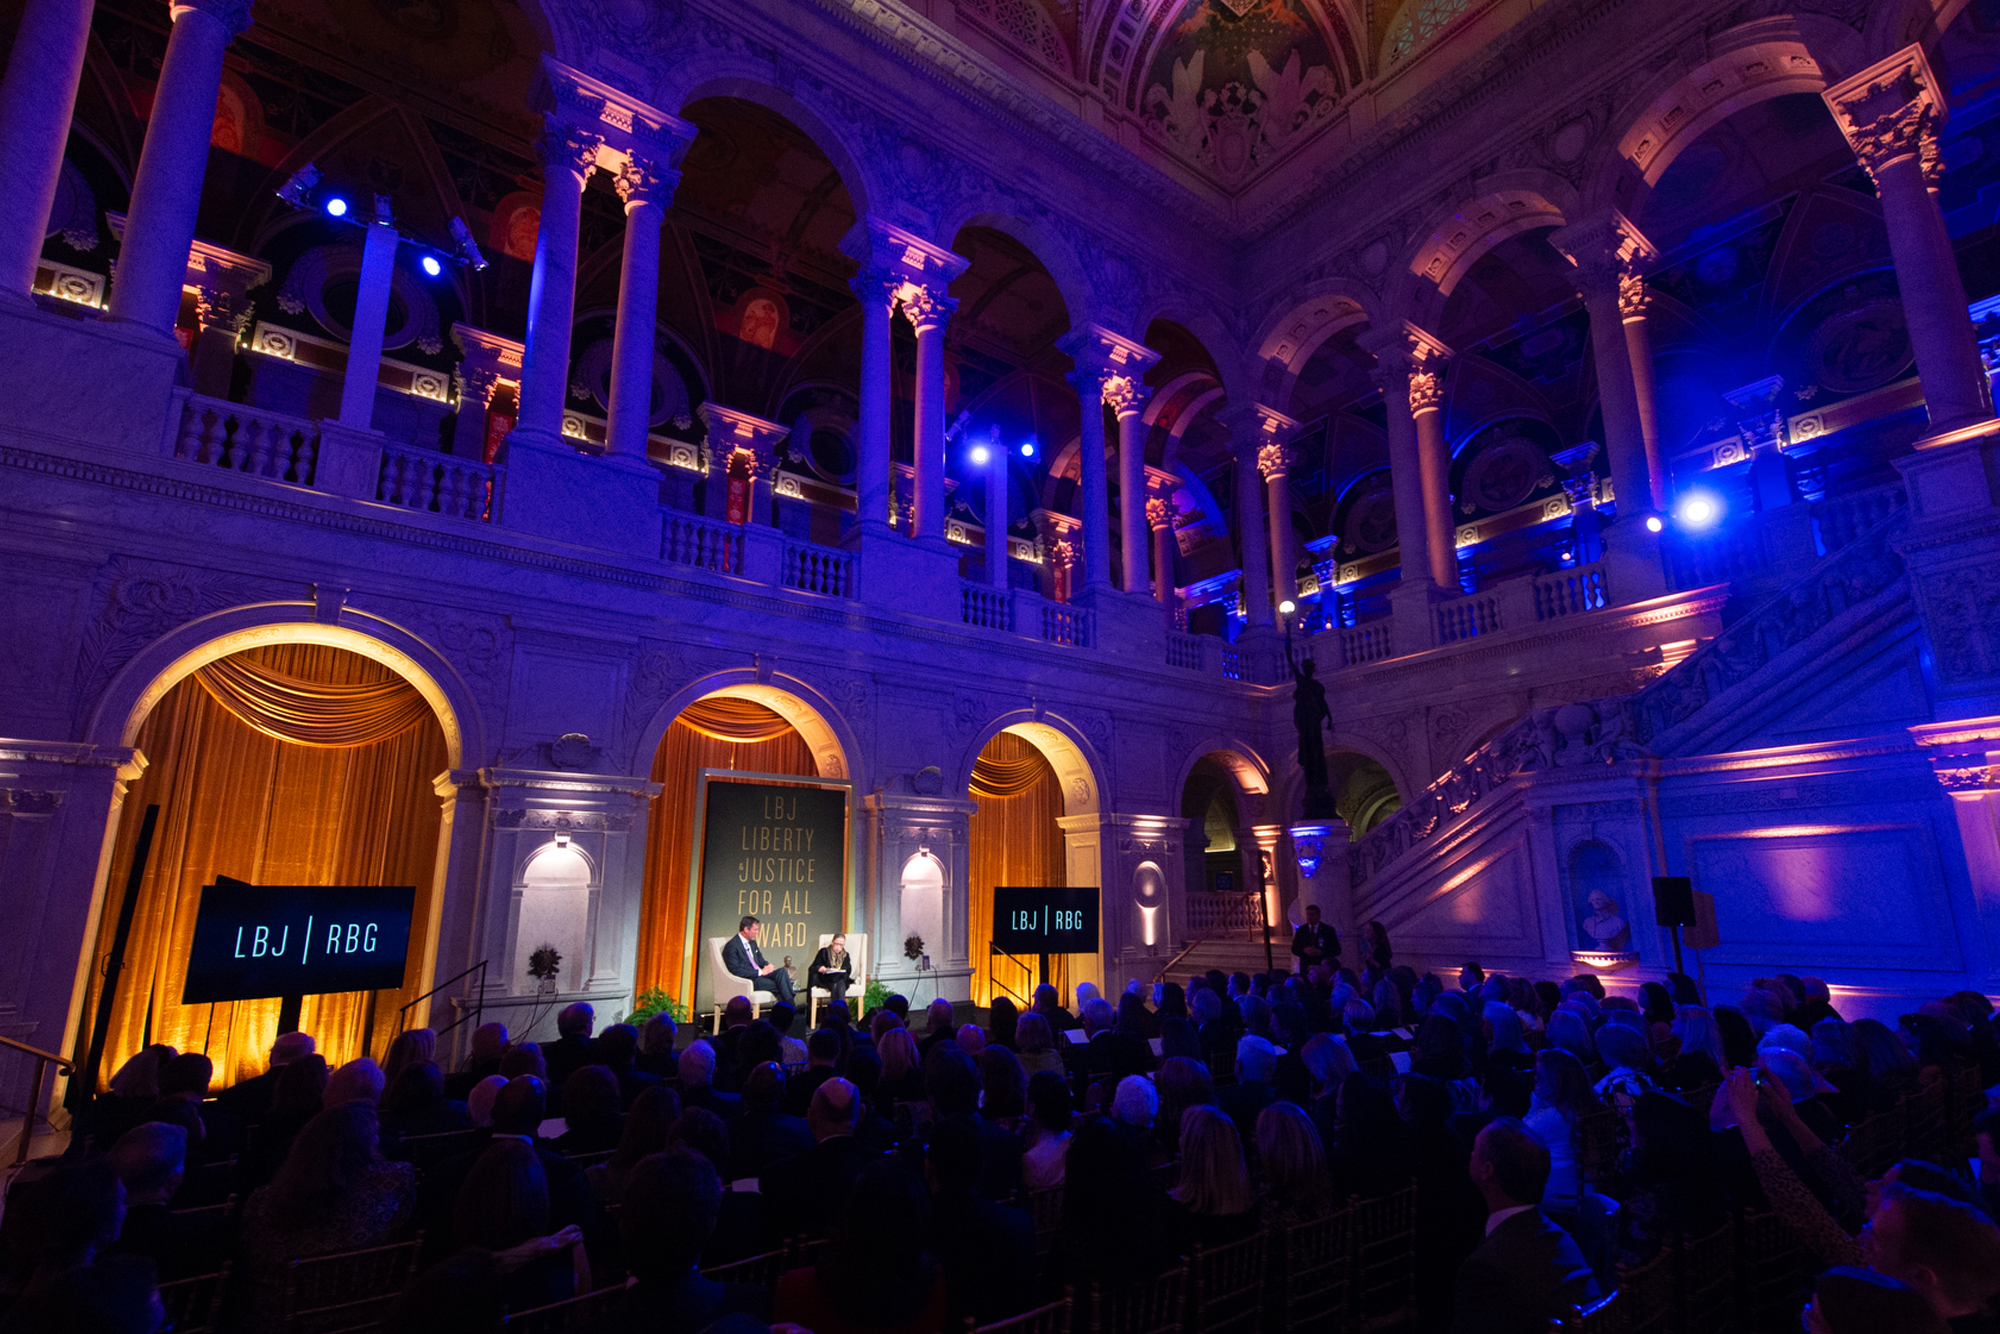 The program was held at the Library of Congress in Washington, D.C. LBJ Foundation photo by Daniel Swartz.